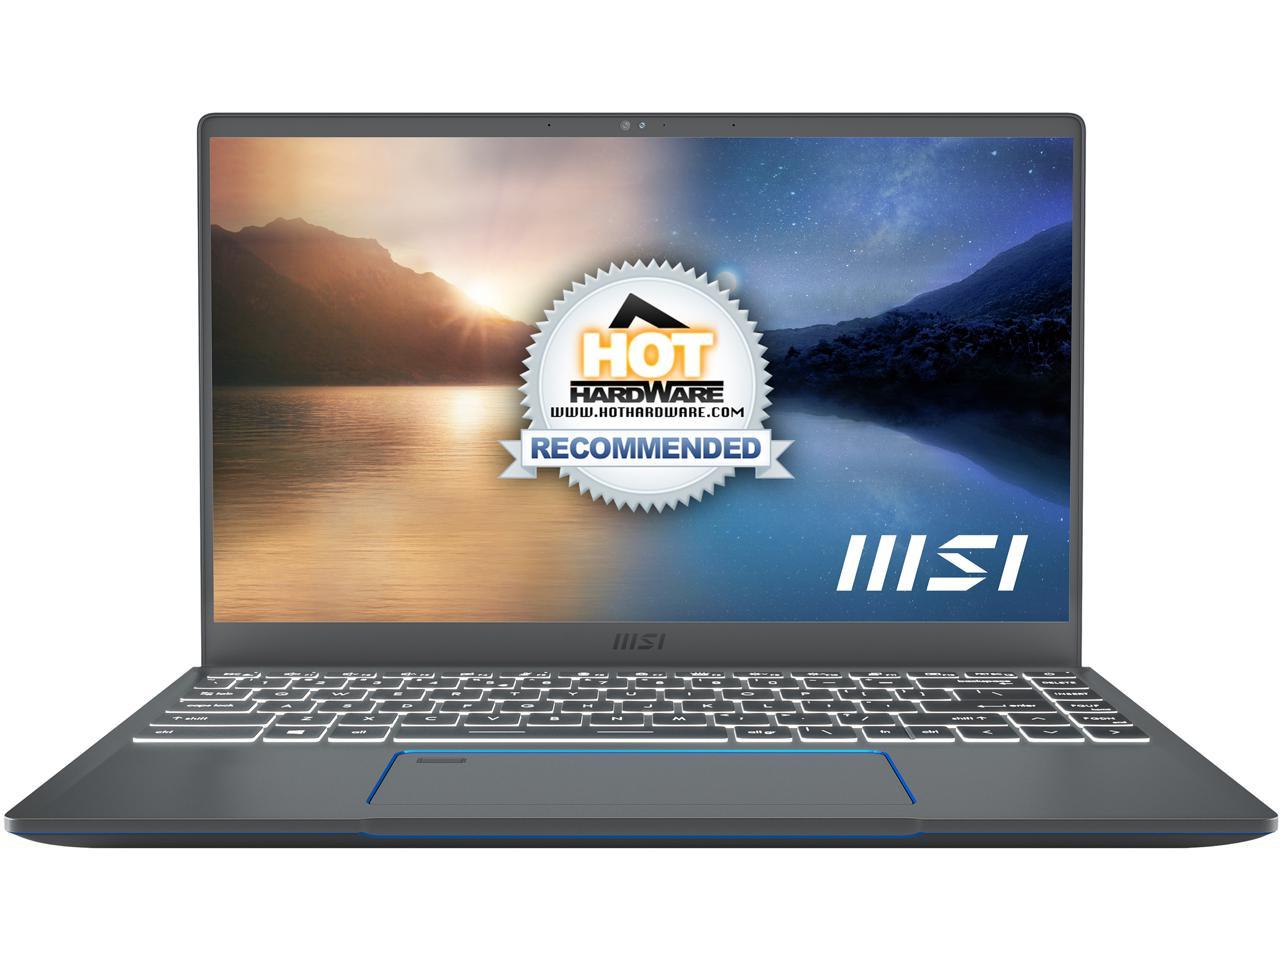 MSI Prestige 14 is one of the cheapest 11th gen Intel laptops with Thunderbolt 4 you can get at the moment - Notebookcheck.net